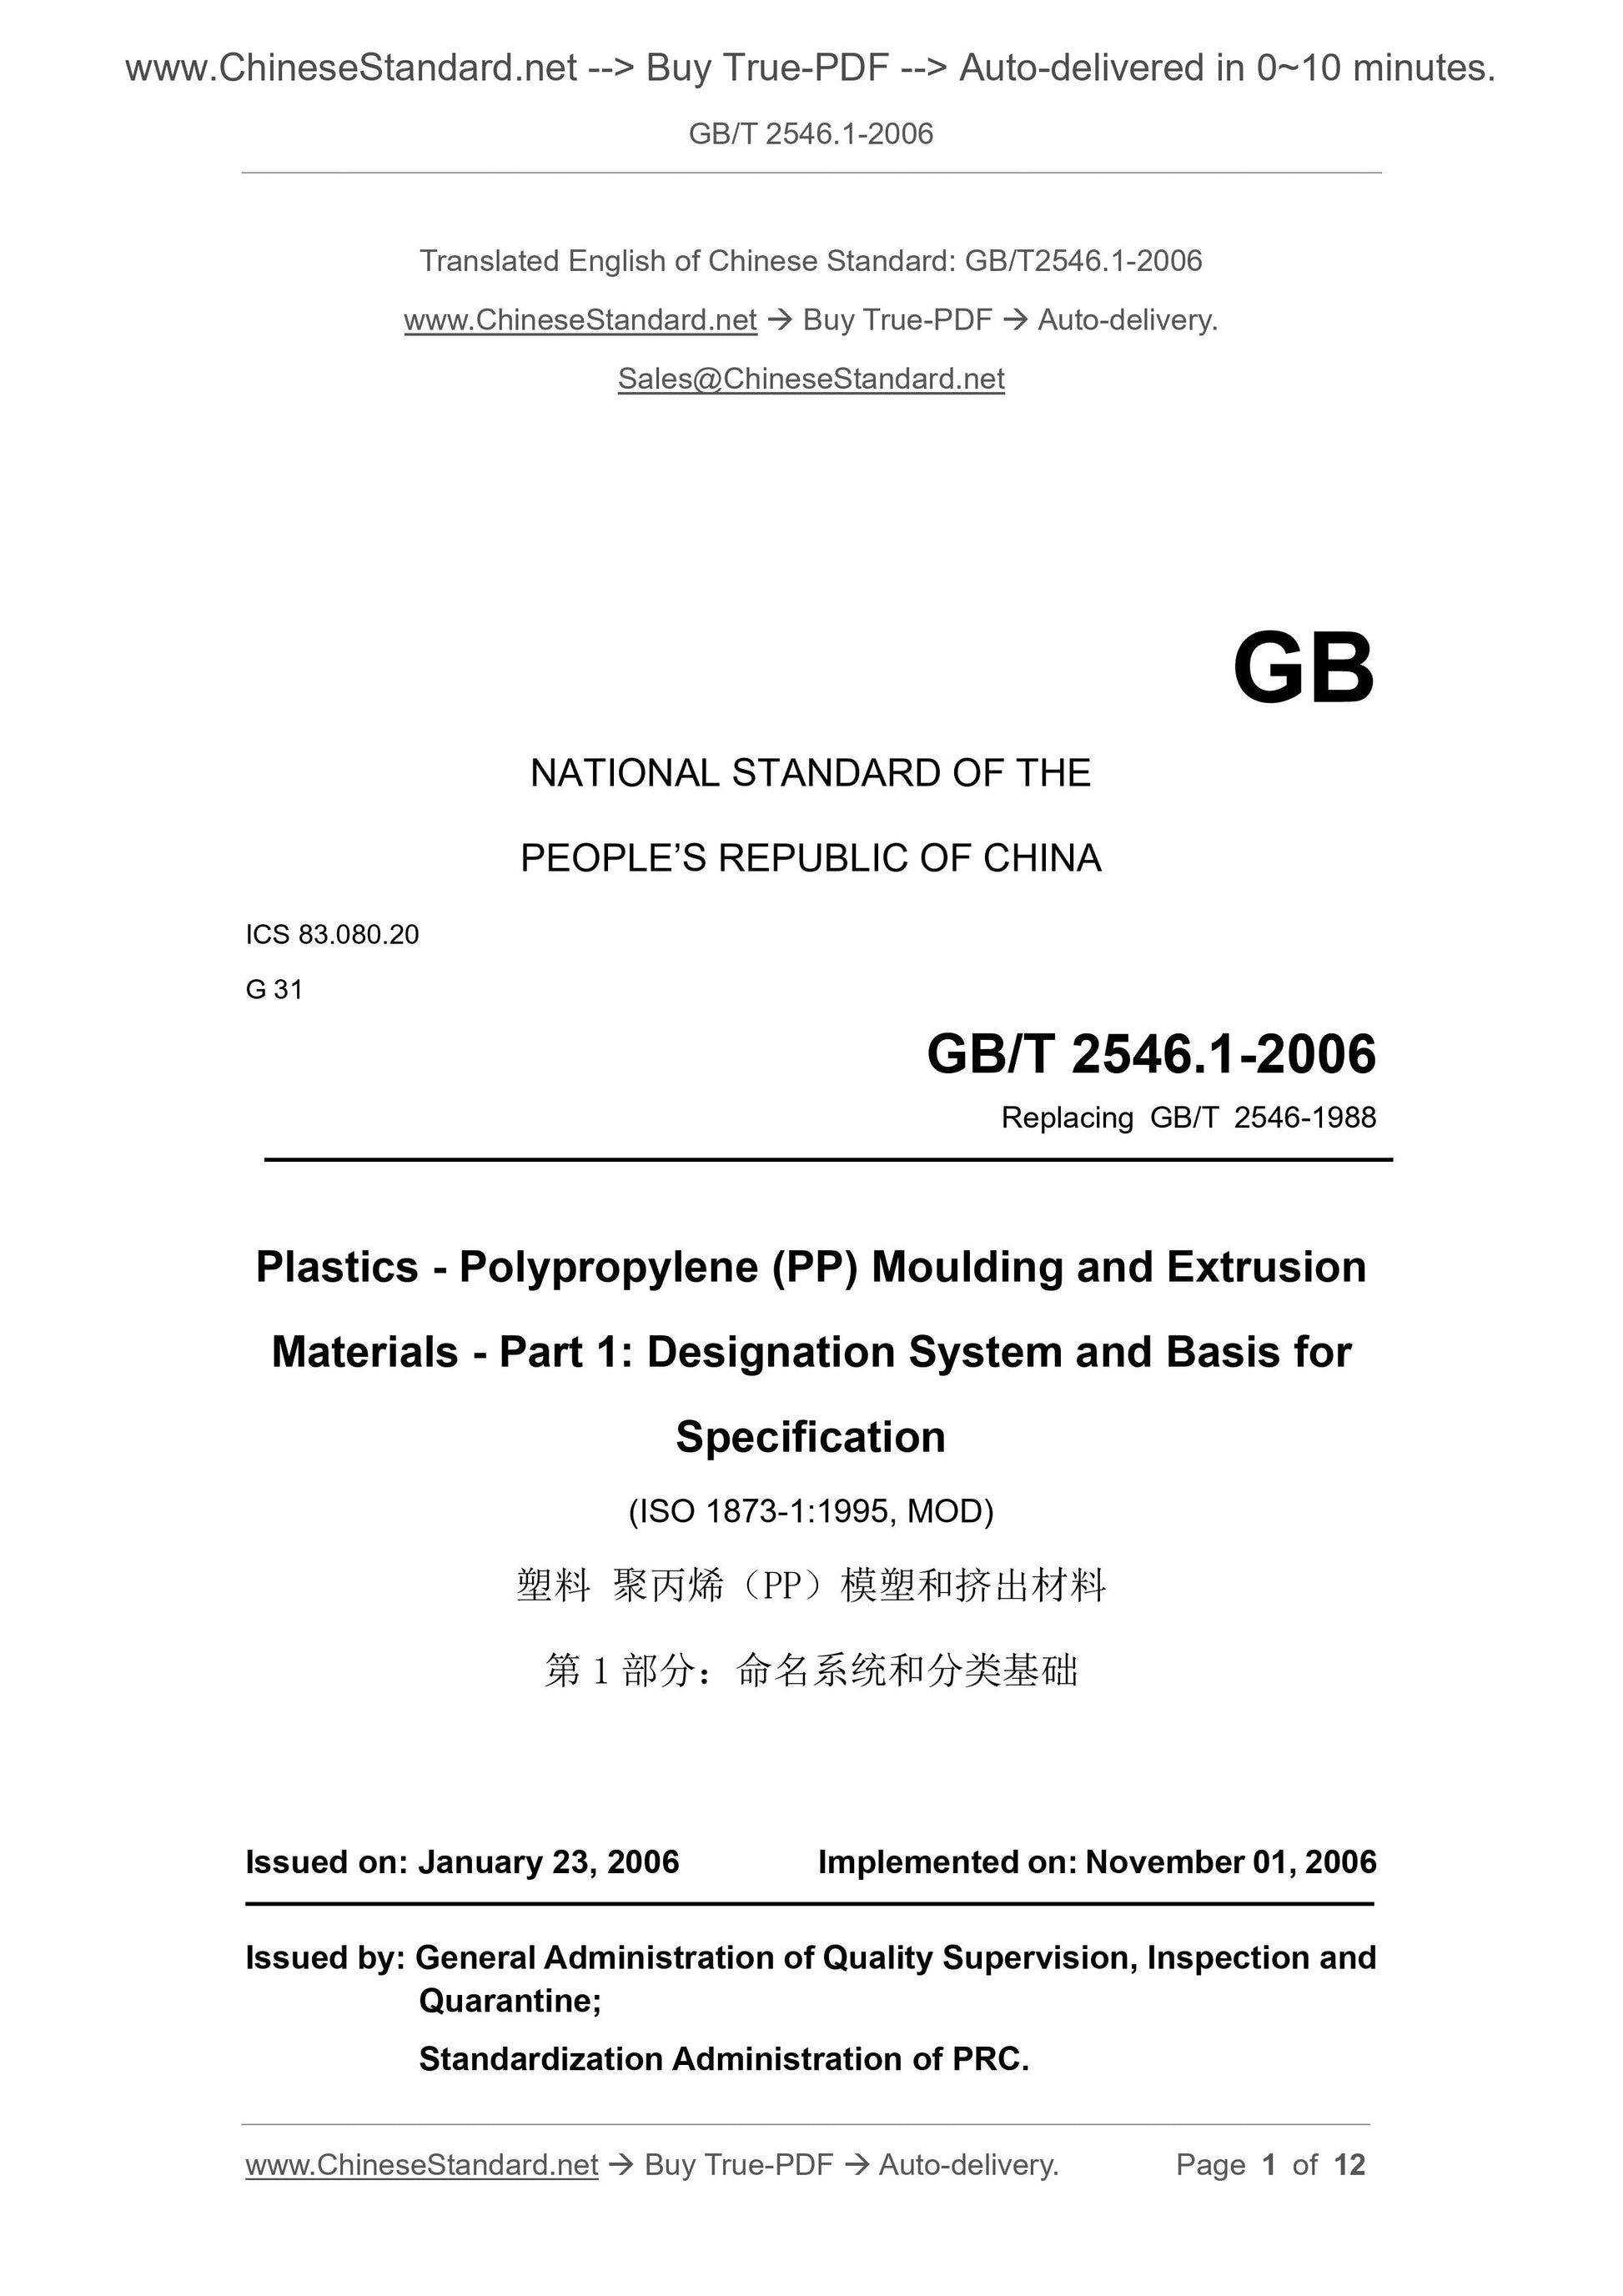 GB/T 2546.1-2006 Page 1